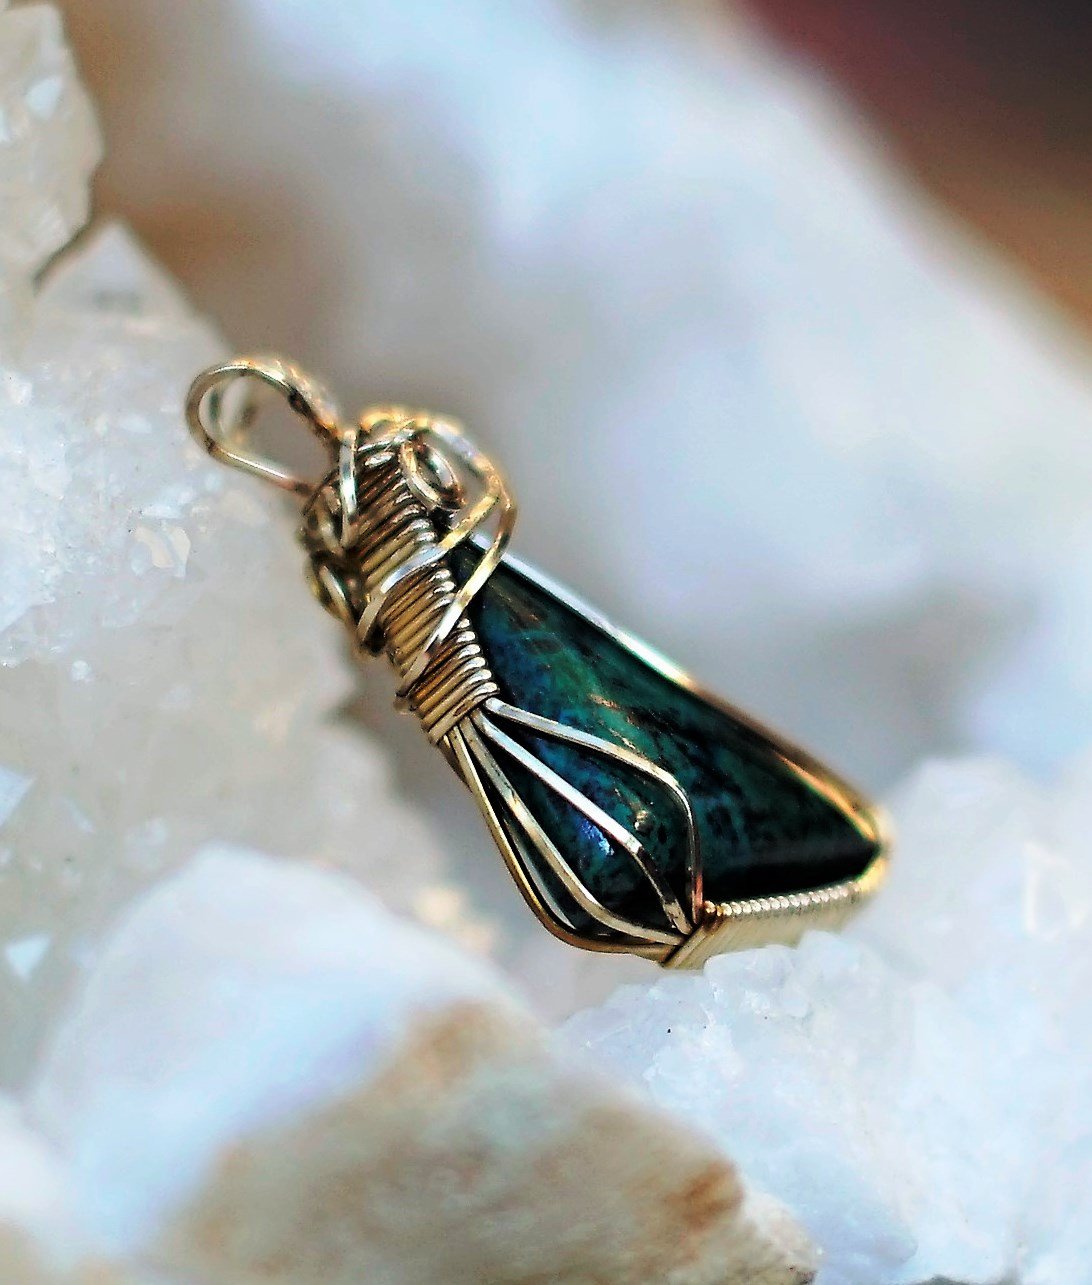 This gorgeous Malachite-Chrysocolla pendant brings serenity, tranquility, and calming energies, making it a beautiful crystal to wear as a pendant. It brings the energy of new beginnings, helping to facilitate smooth transitions in times of change. Working with Malachite-Chrysocolla is one of the most healing ways to release emotional blockages. It is also invaluable in creative expression.